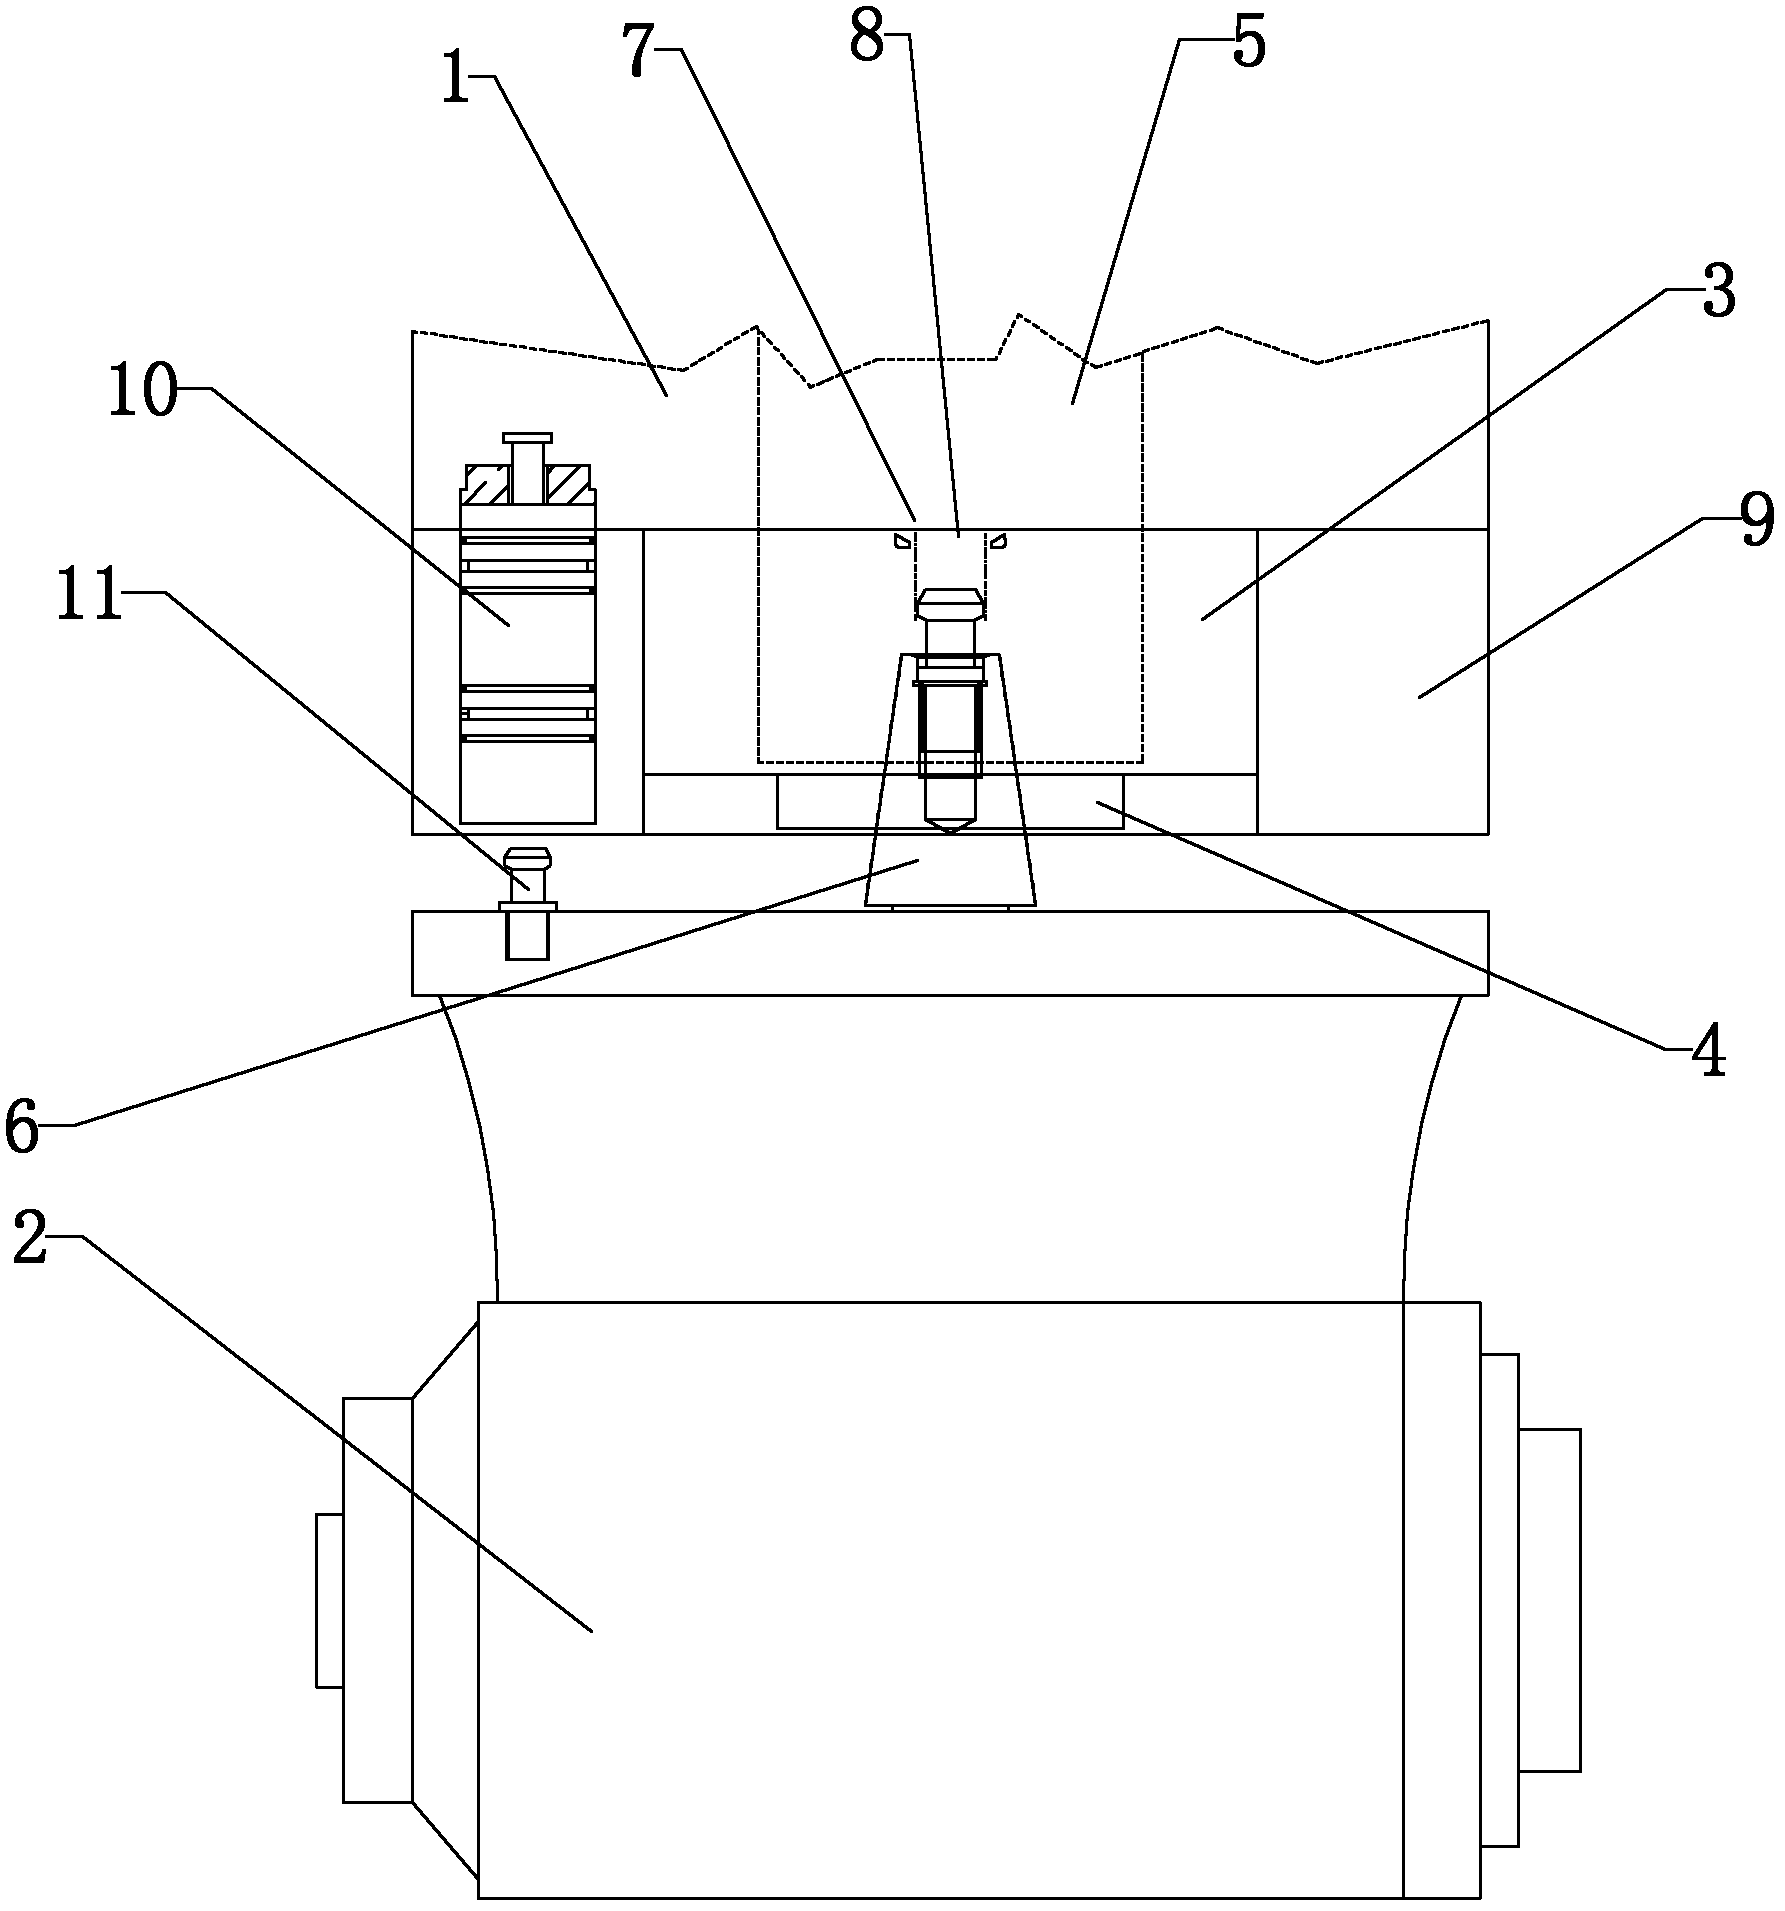 Electromagnetic clamping device for mechanical milling head